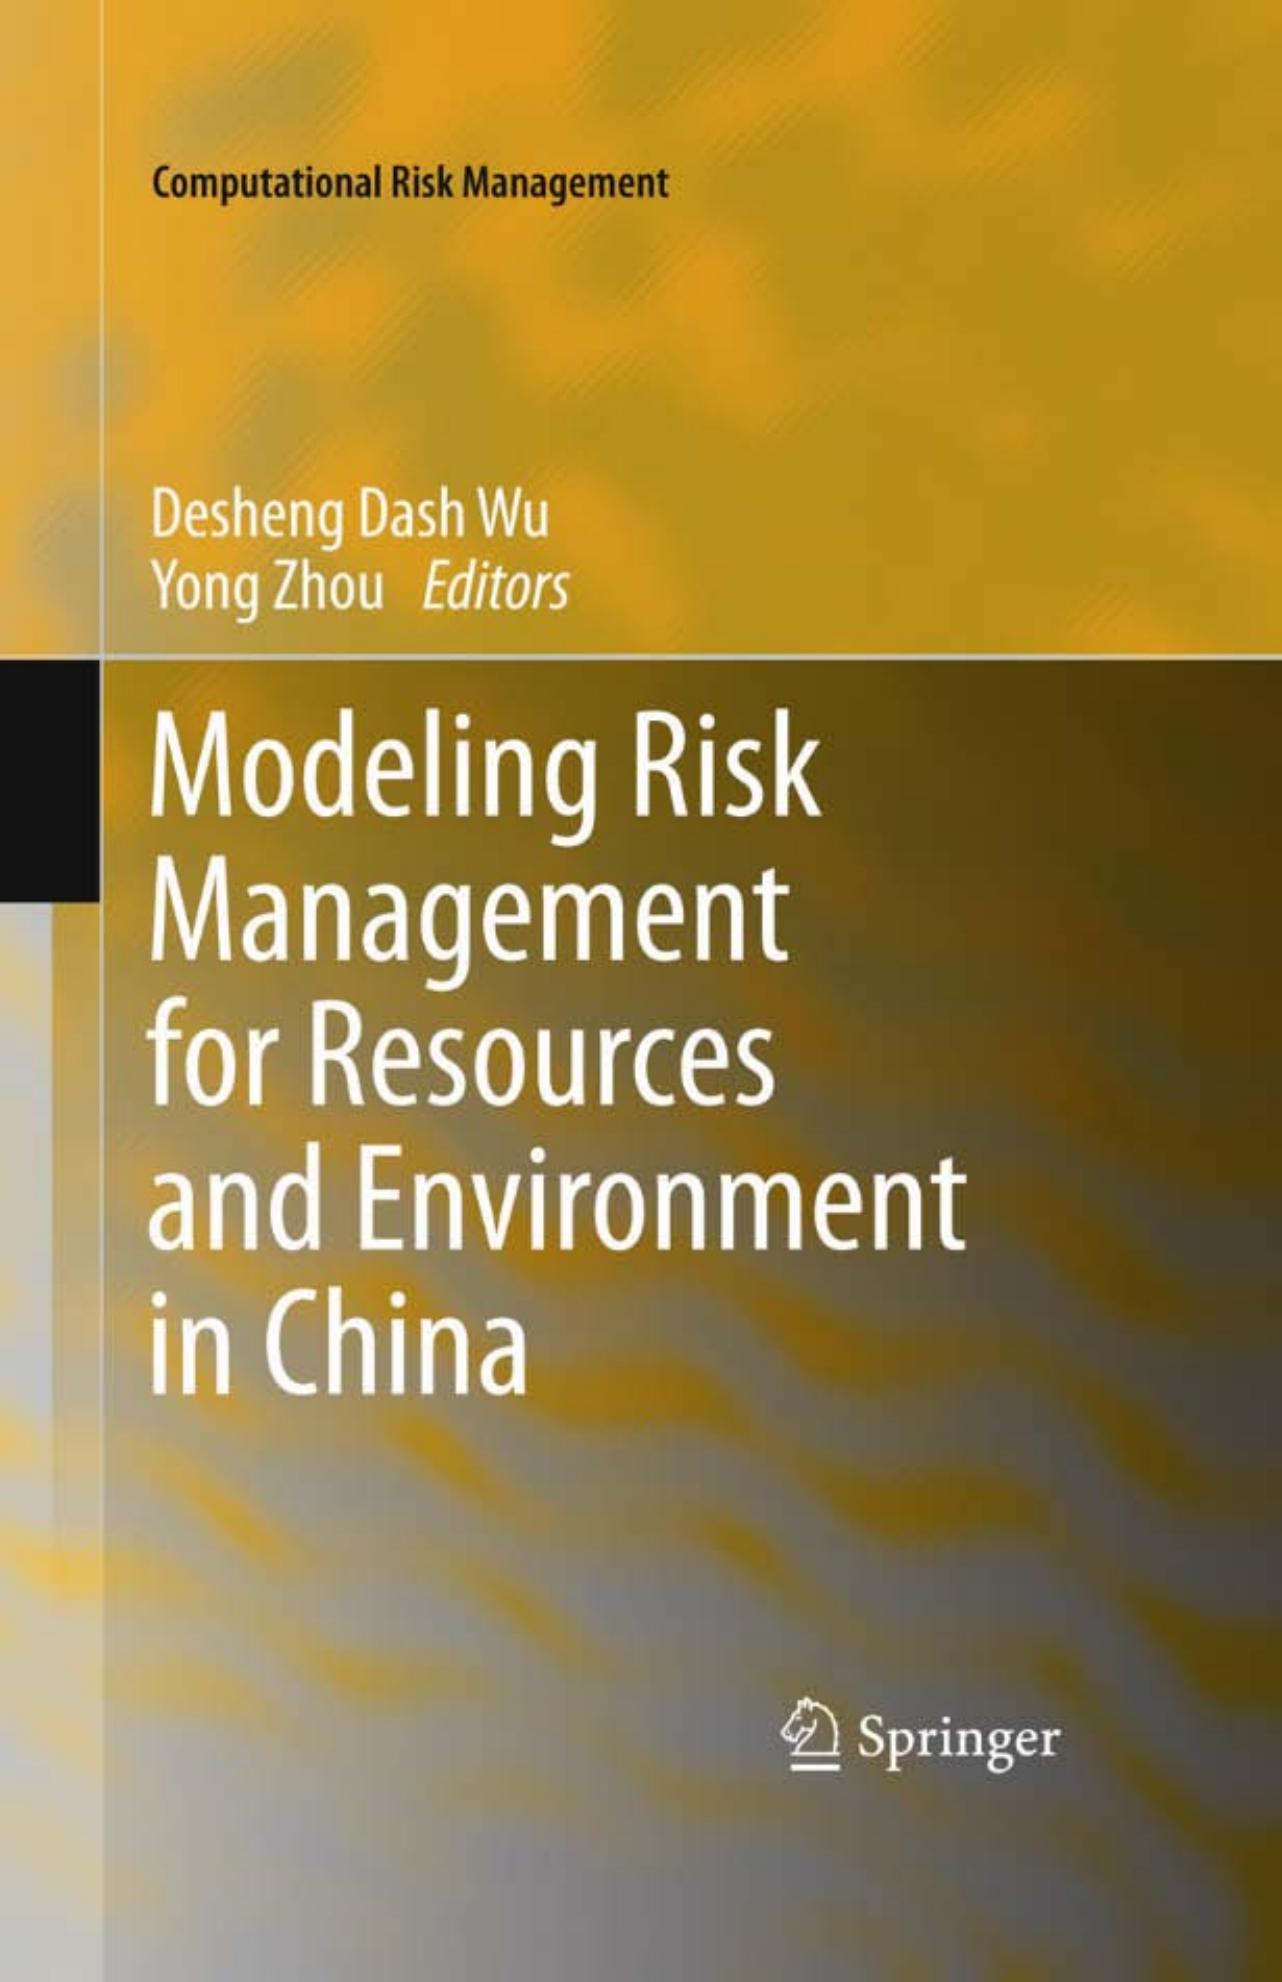 Modeling Risk Management for Resources and Environment in China (Computational Risk Management)